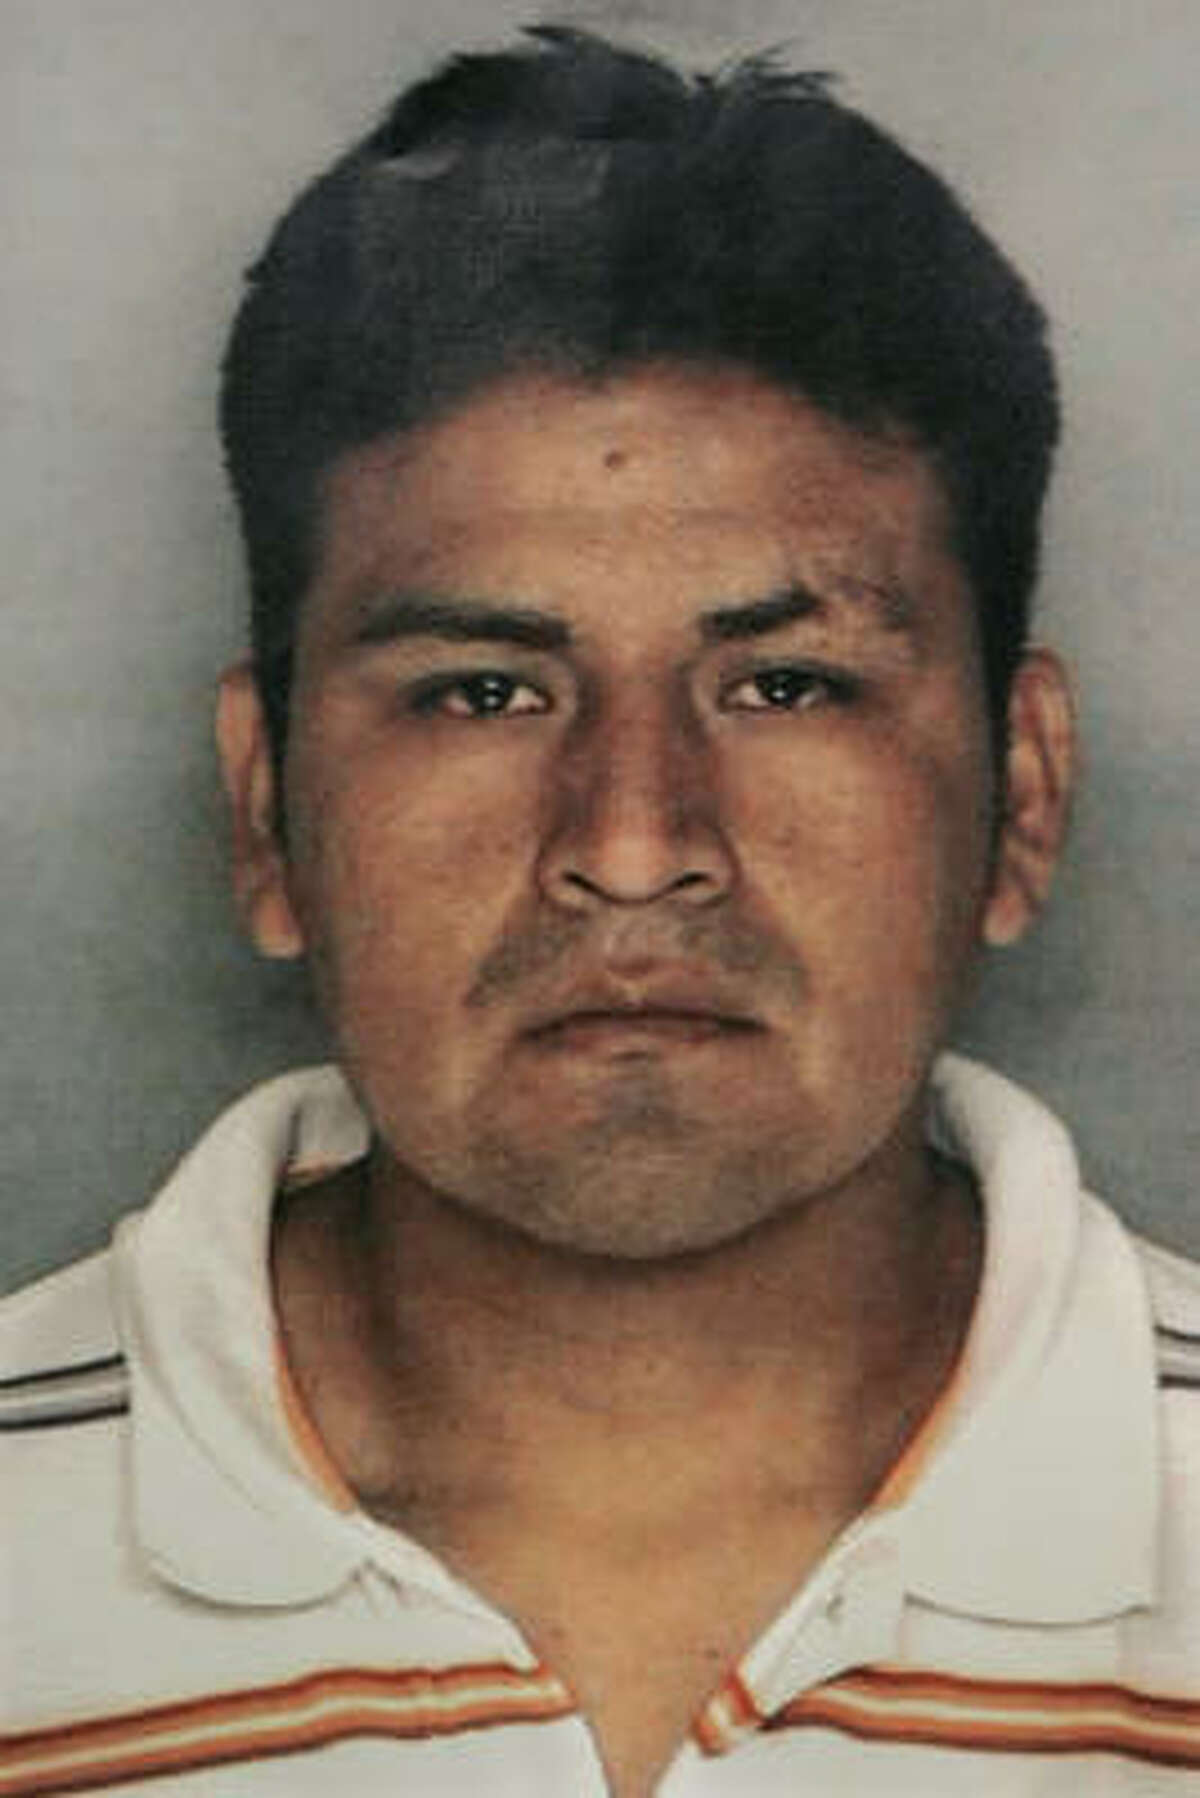 A police photo released Thursday shows Jose Carranza, 28, who was charged with three counts of first-degree murder and one count of attempted murder.